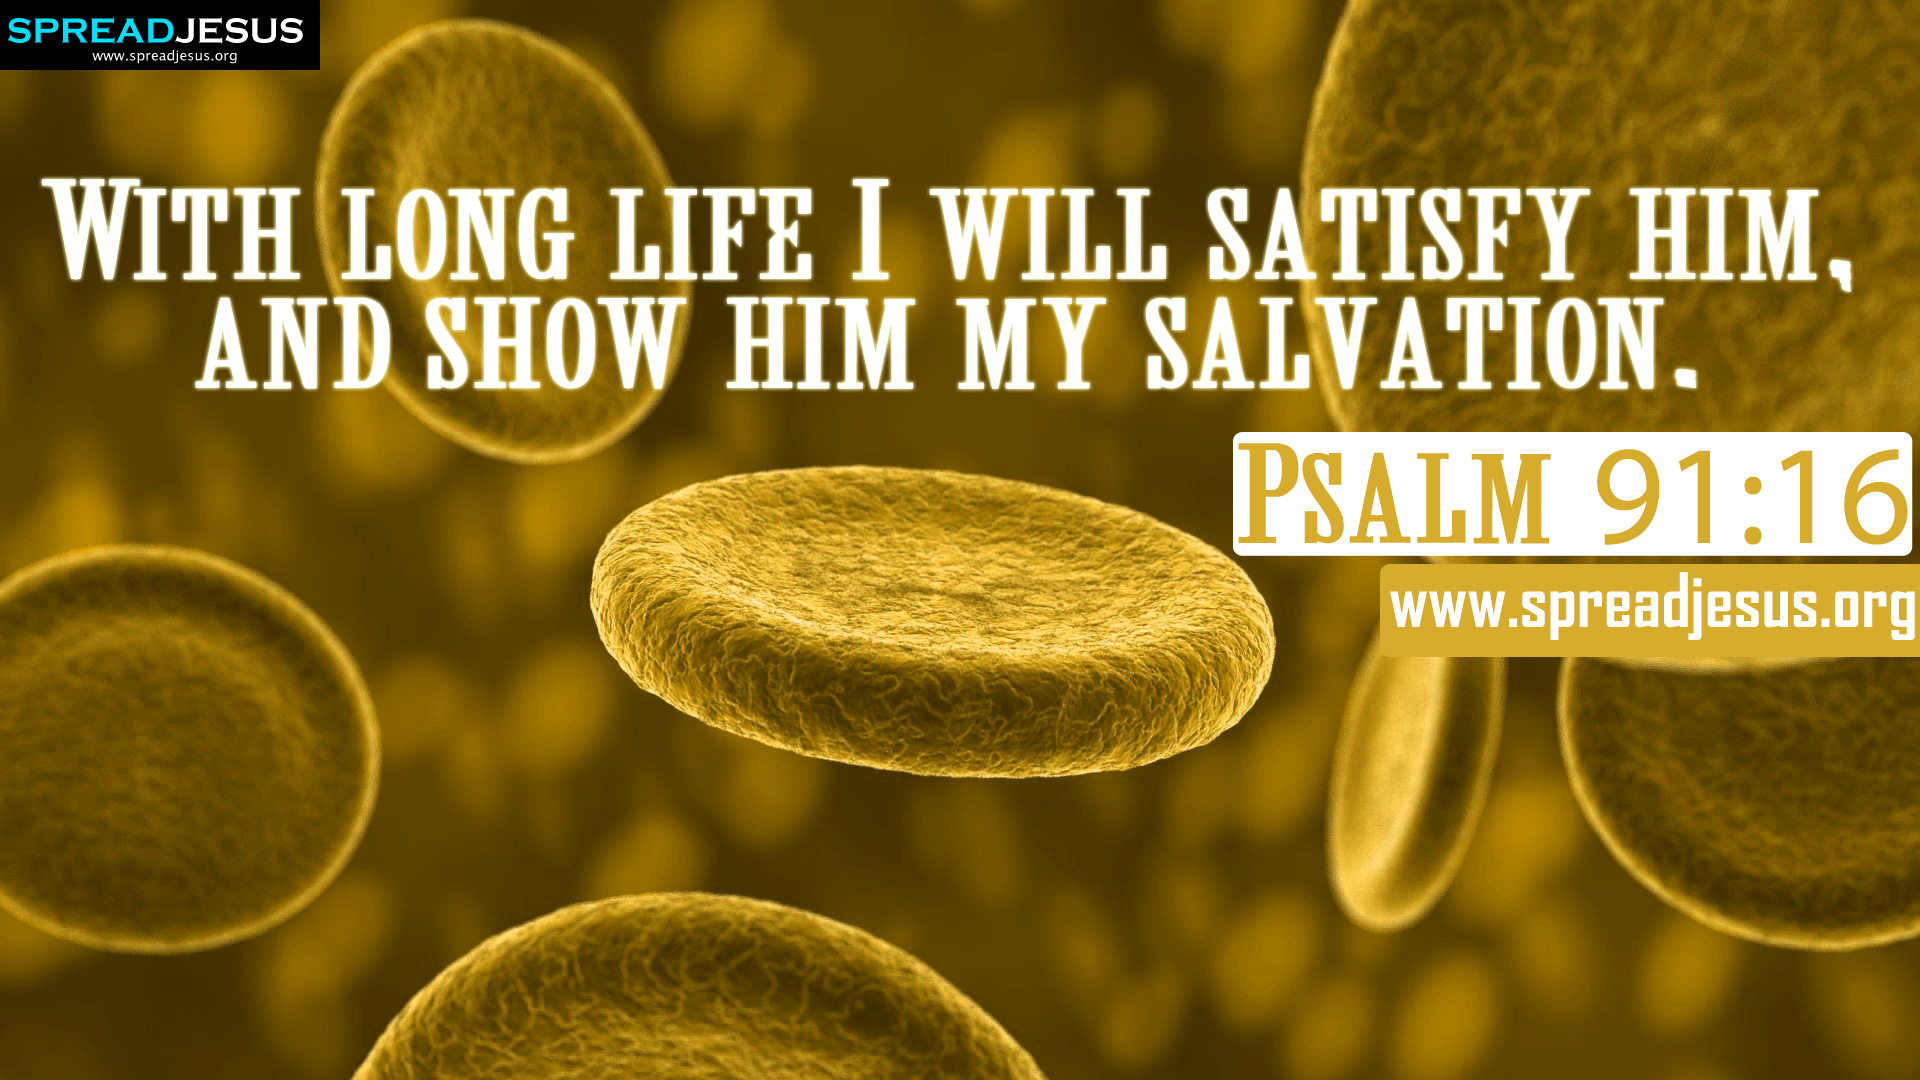 16 Bible Quotes Hd Wallpapers Free Download With Long - Psalms 91 16 - HD Wallpaper 